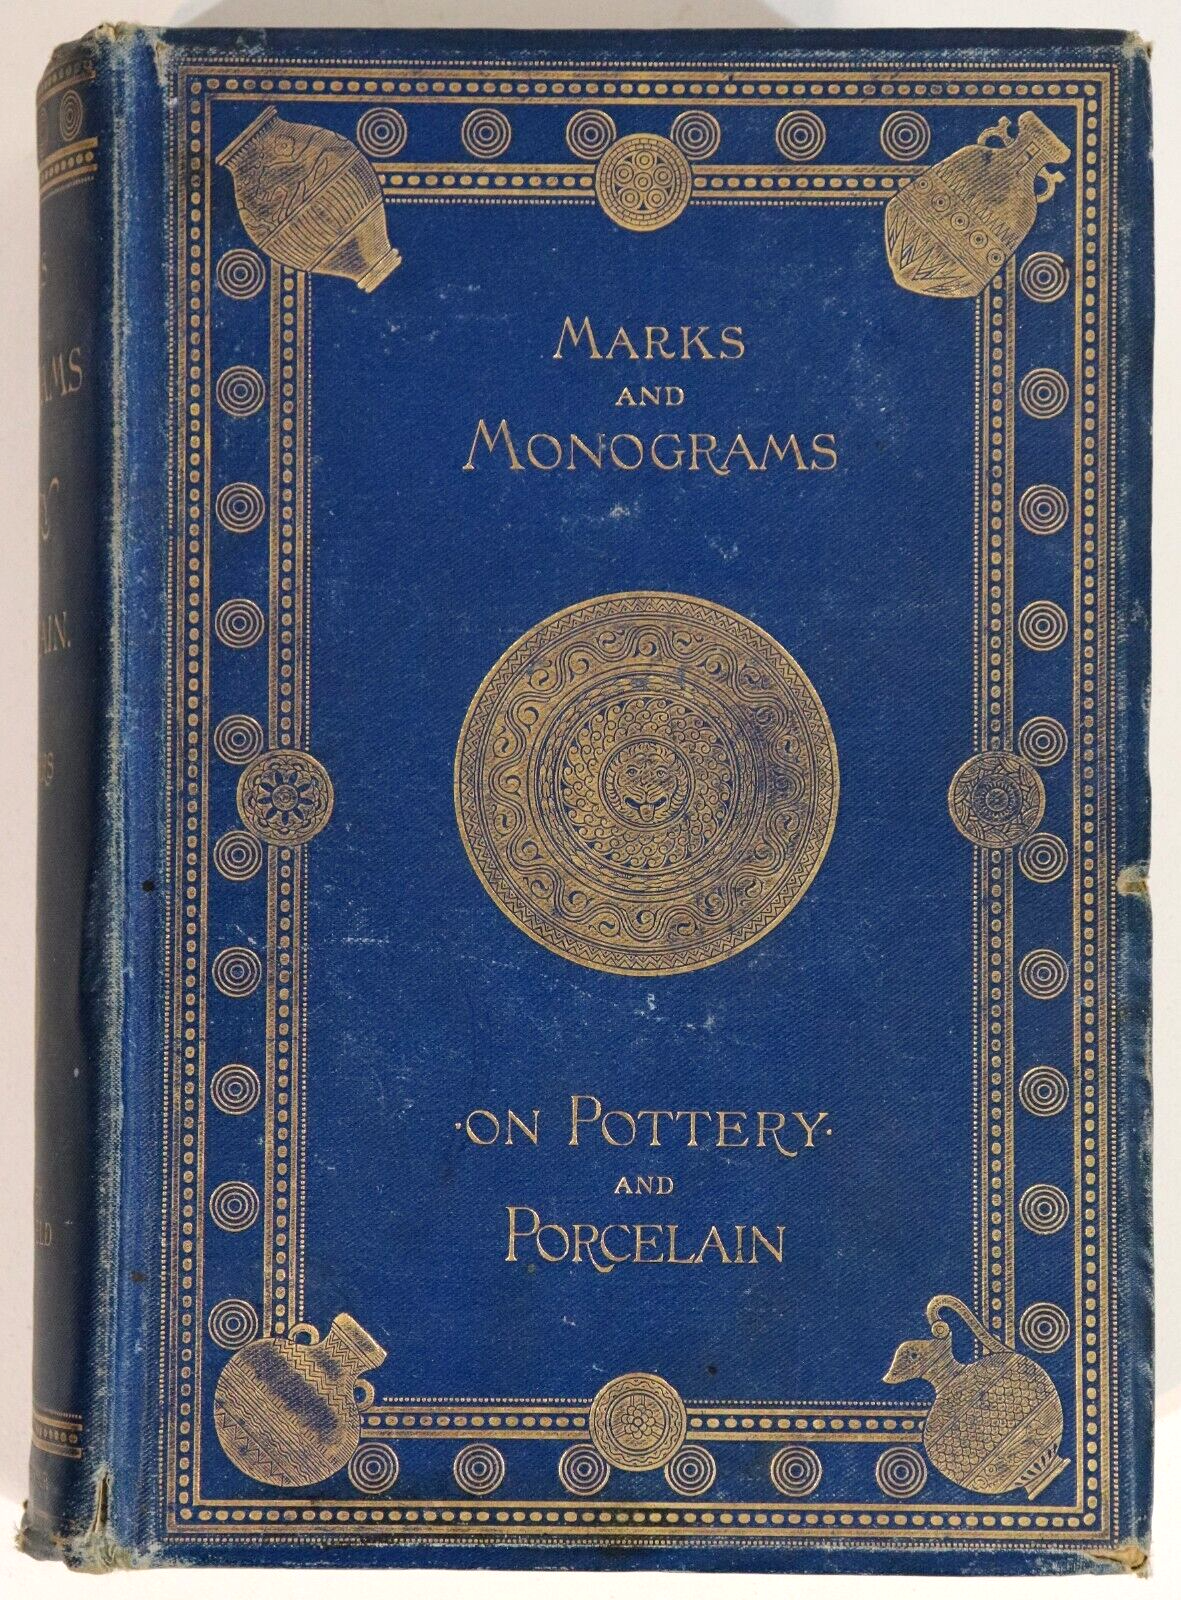 Marks & Monograms On Pottery & Porcelain - 1903 - Antique Reference Book - 0